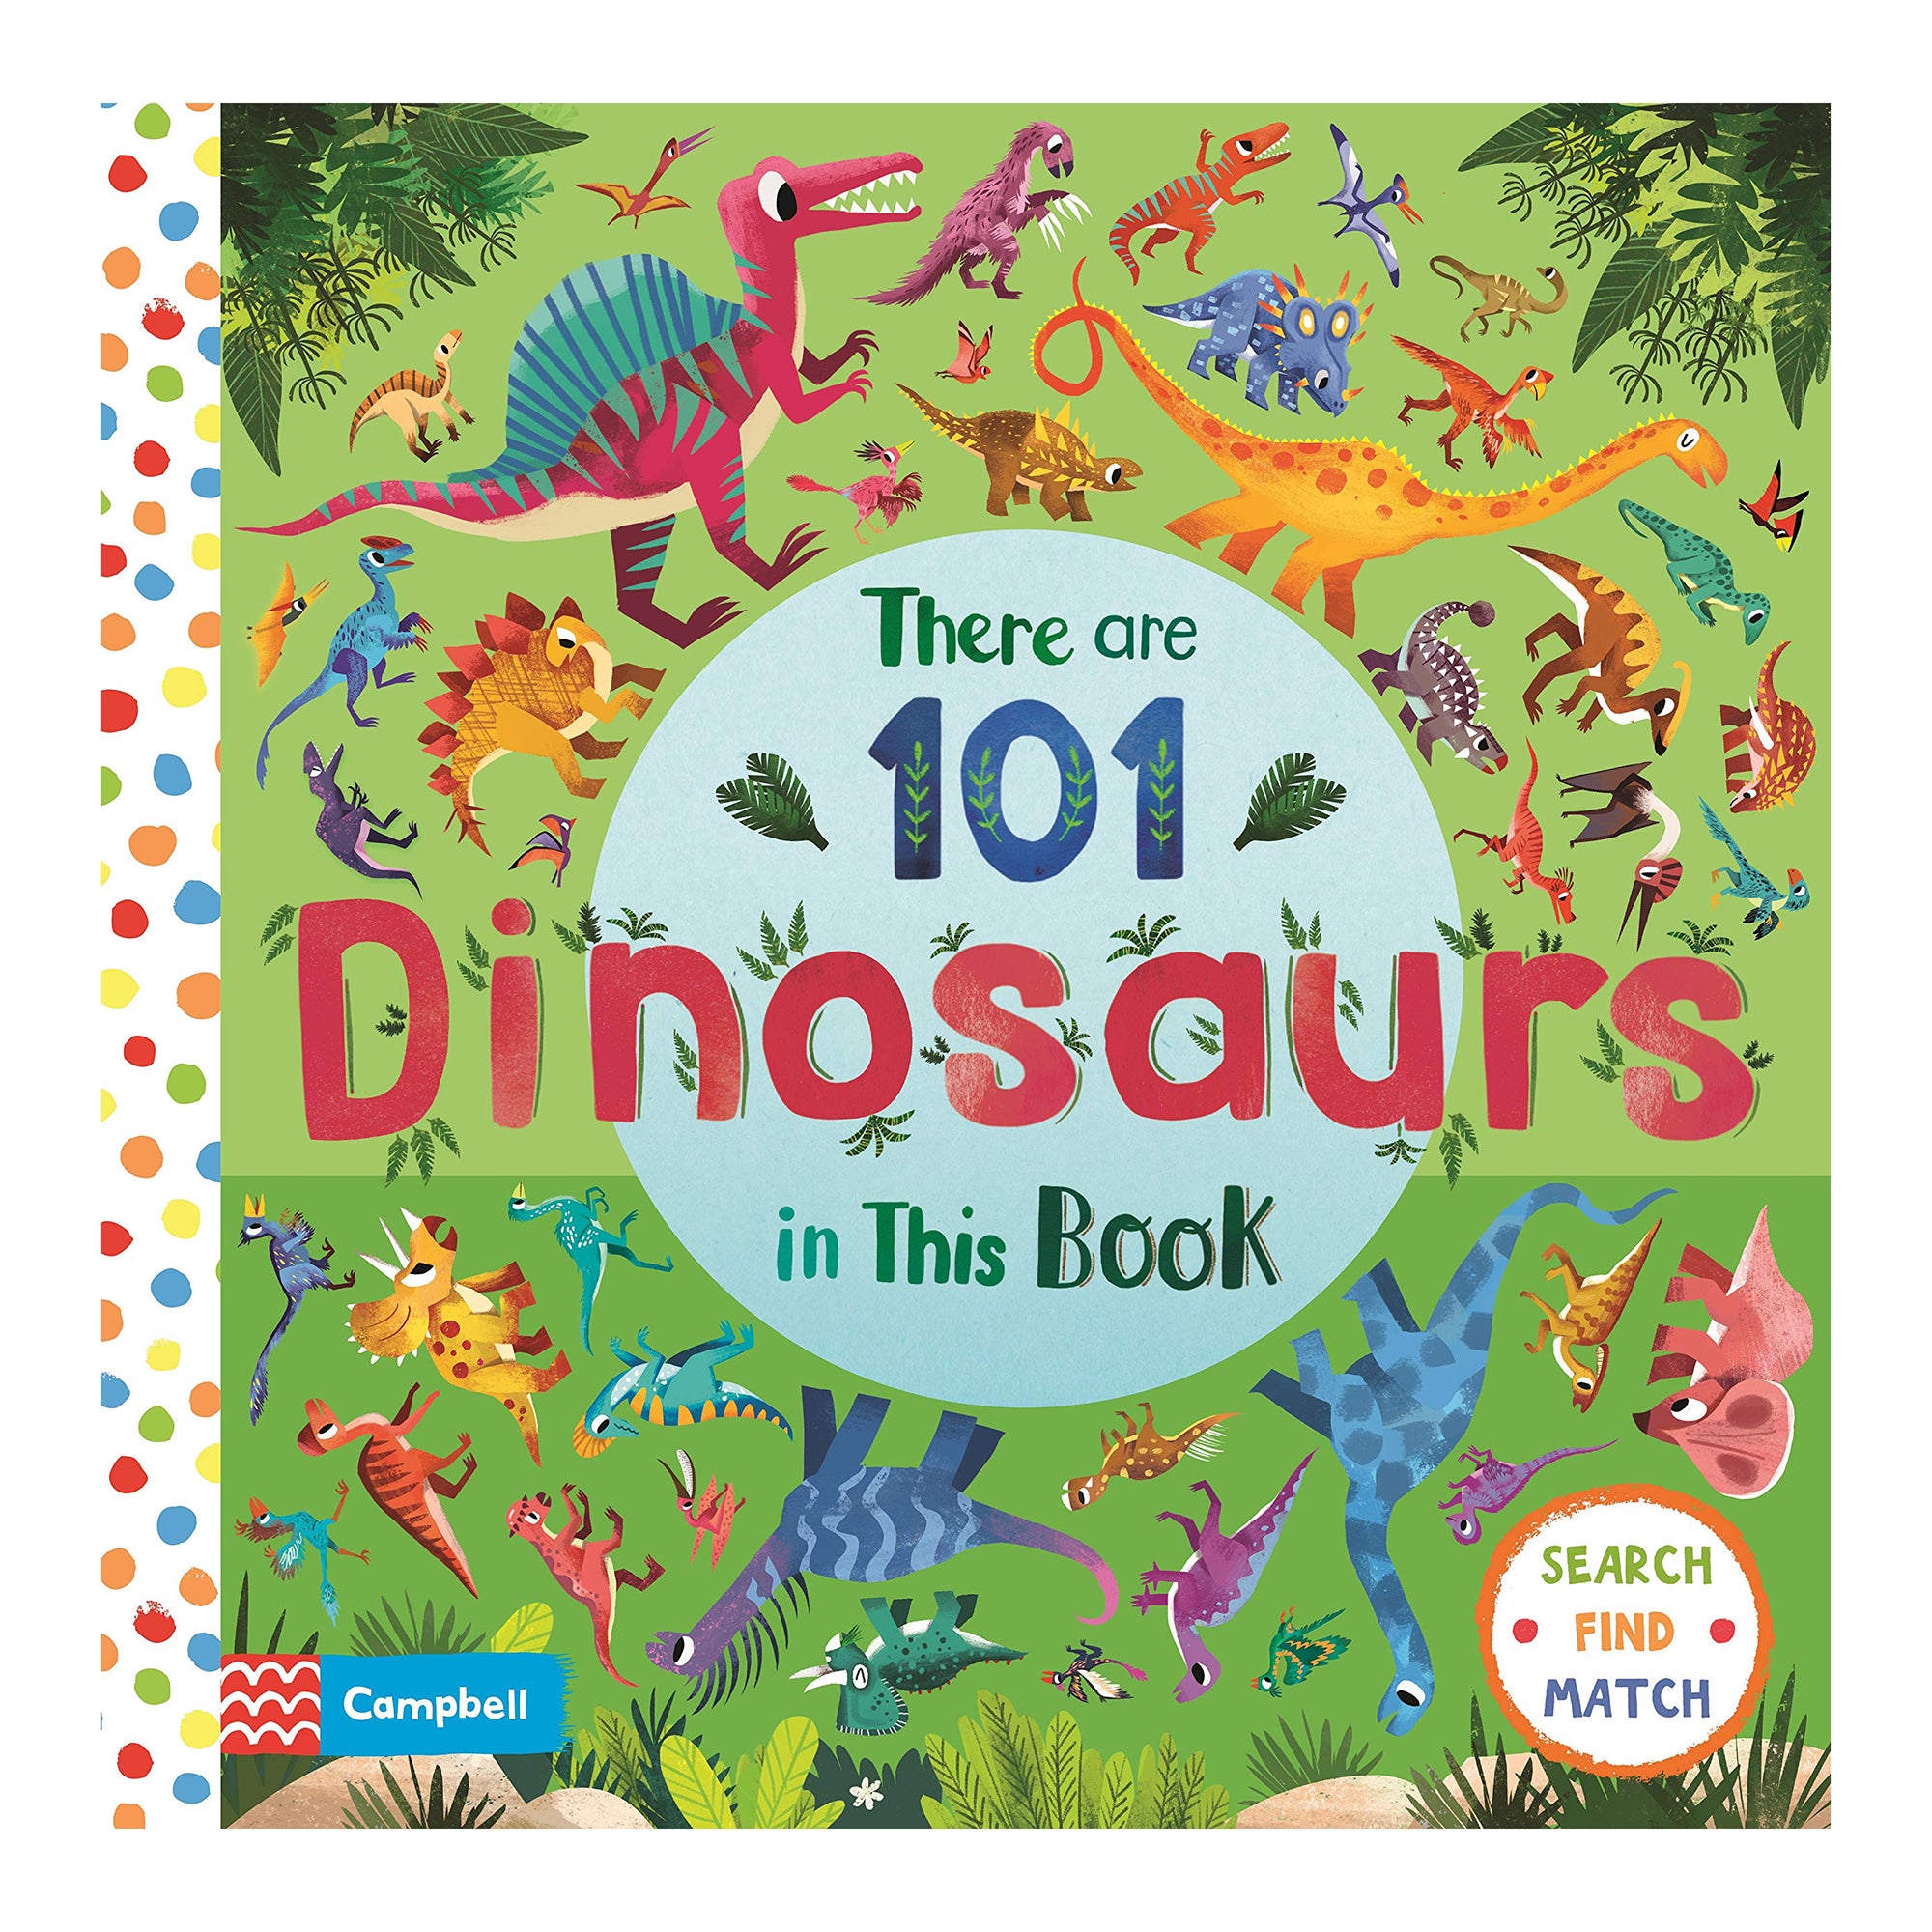 CAMPBELL'S THERE ARE 101 DINOSAURS IN THIS BOOK